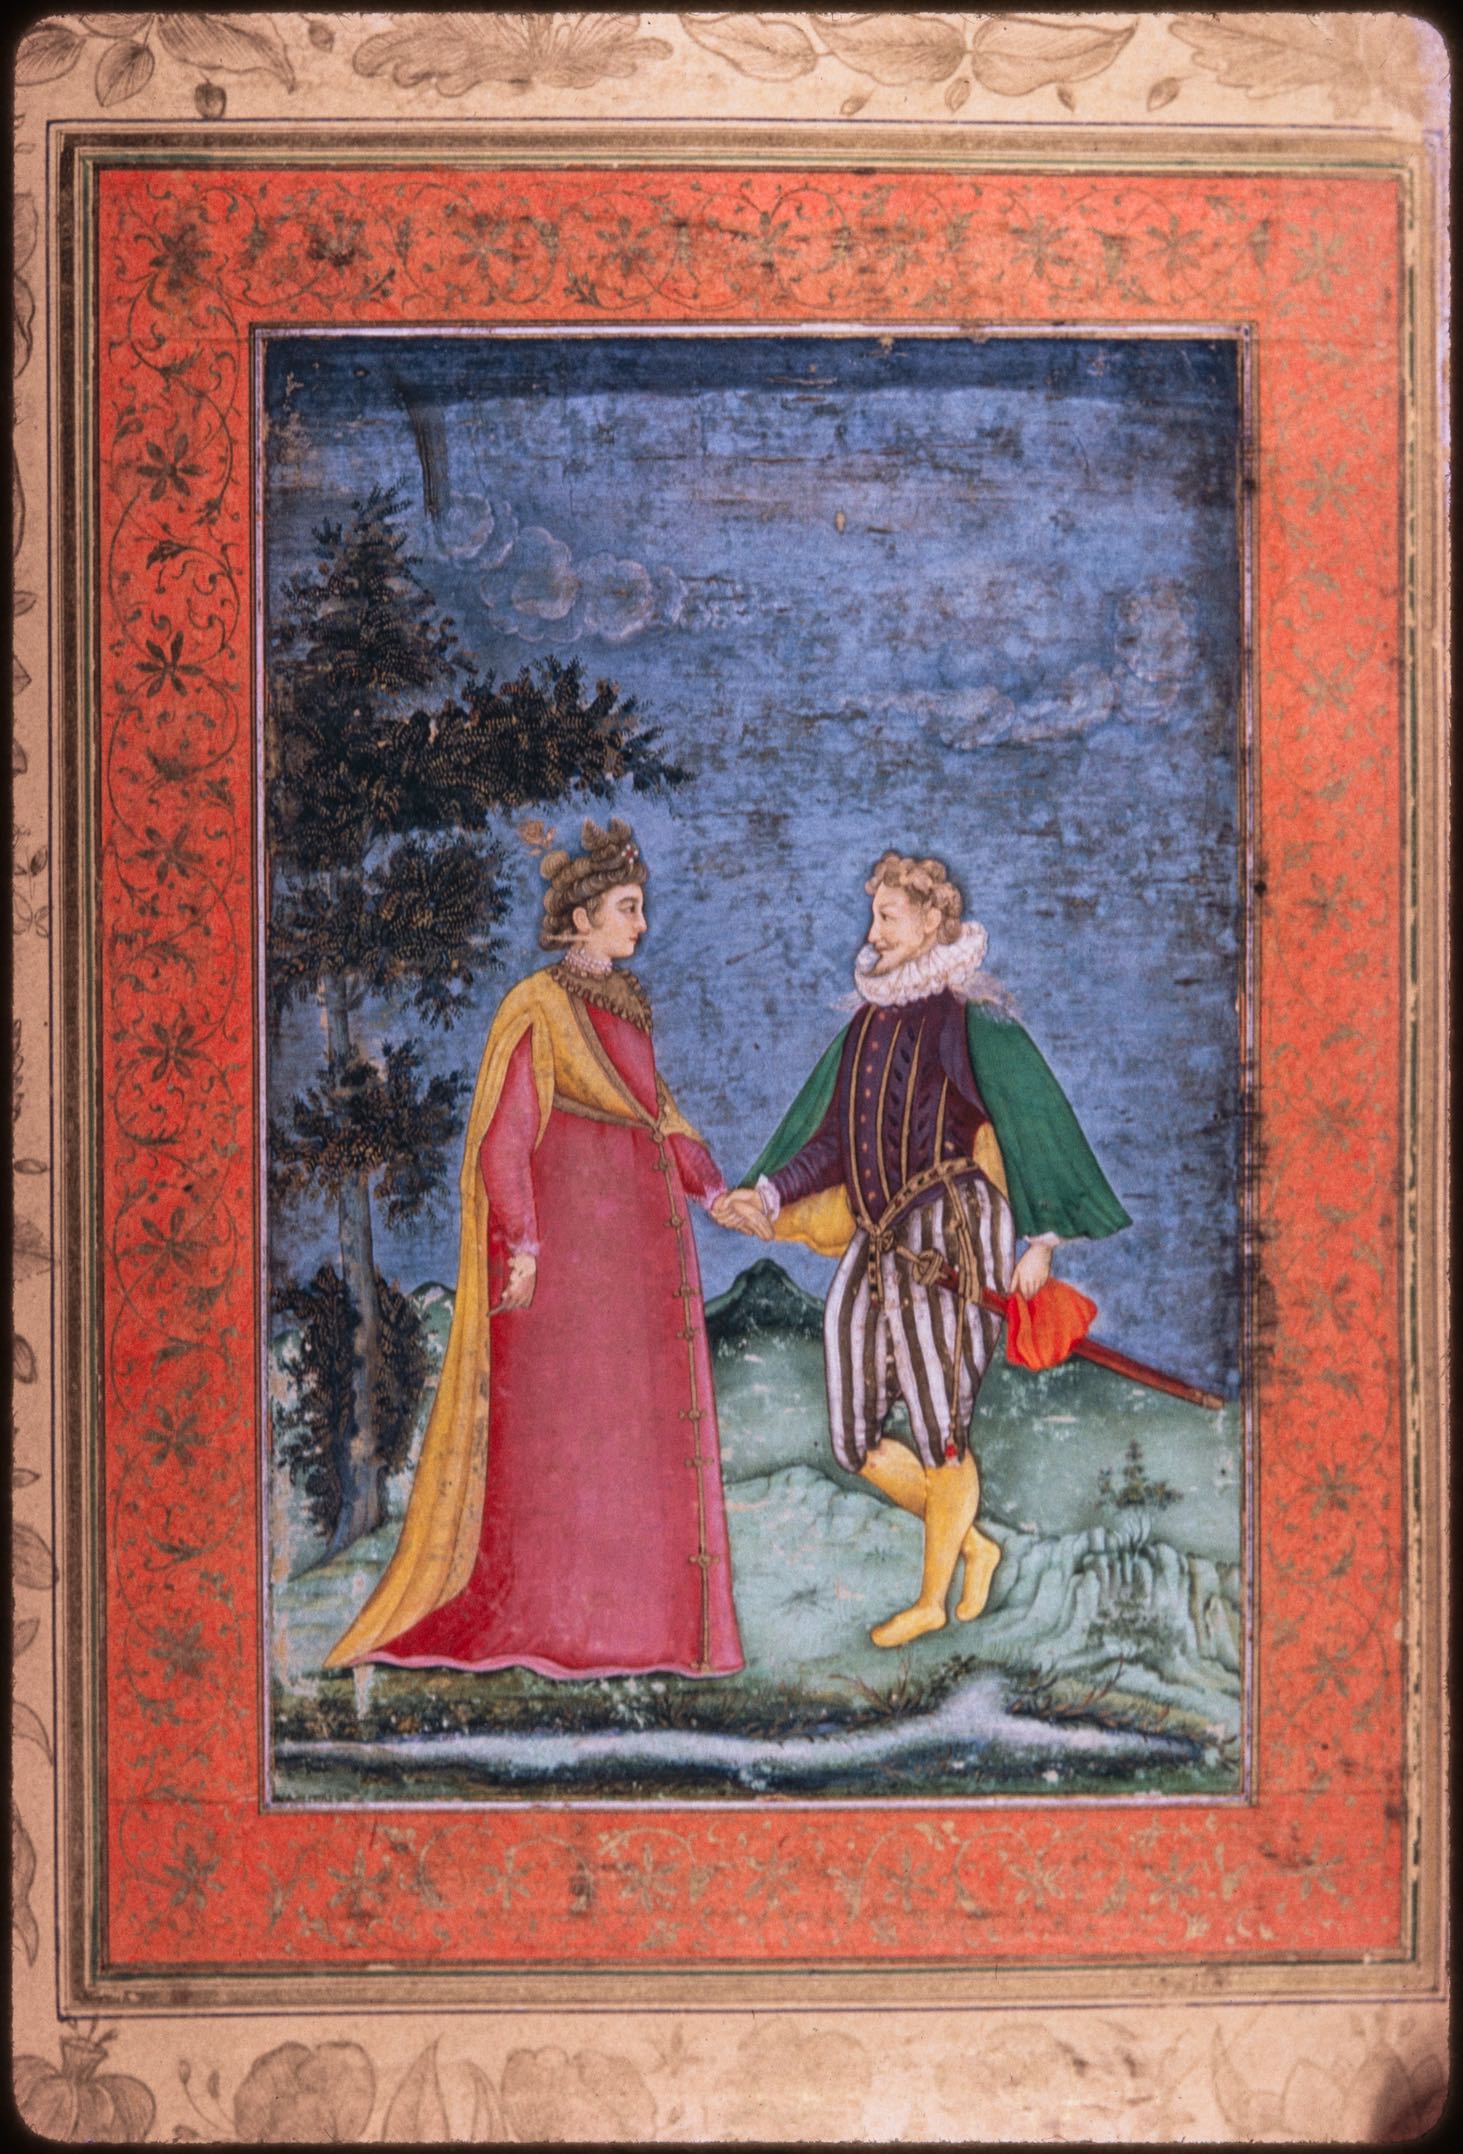 European gentleman and lady , f. 74 from the Dara Shikoh Album (British Library Add. Or. 3129)